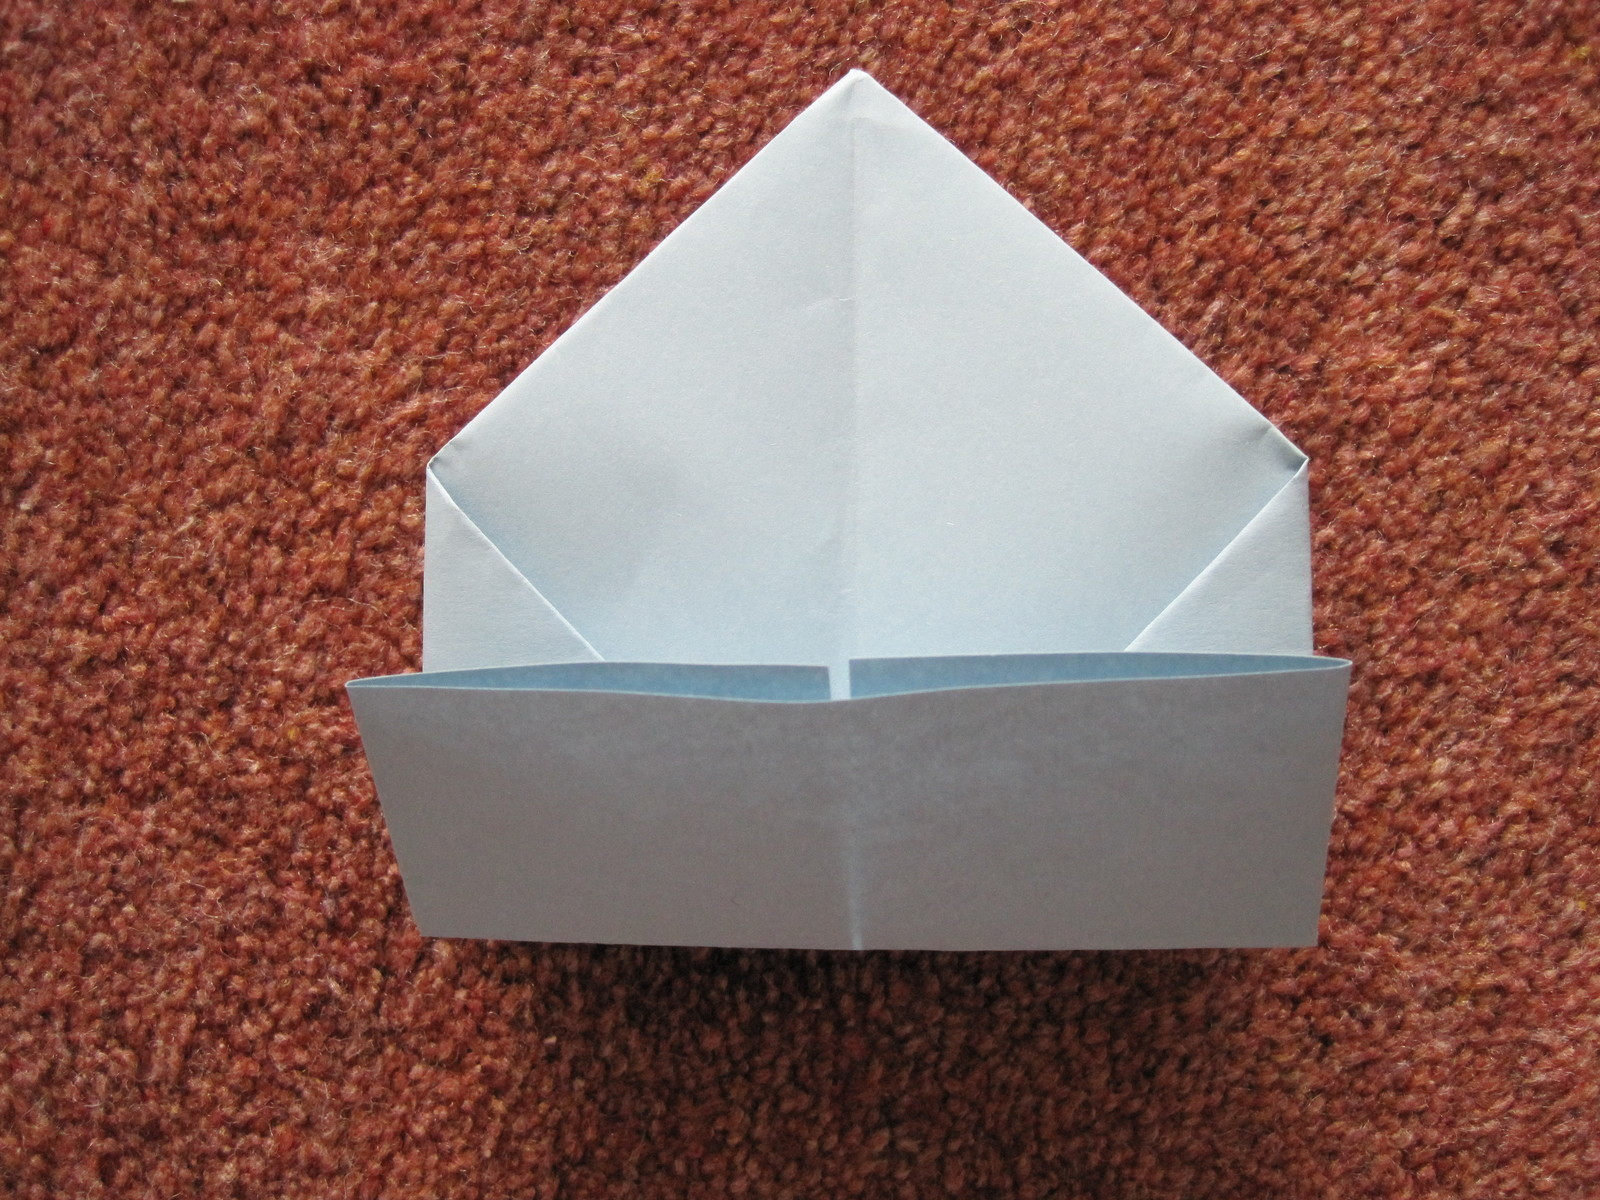 Origami Photo Box Quick Origami Disposable Trash Box How To Fold An Origami Box